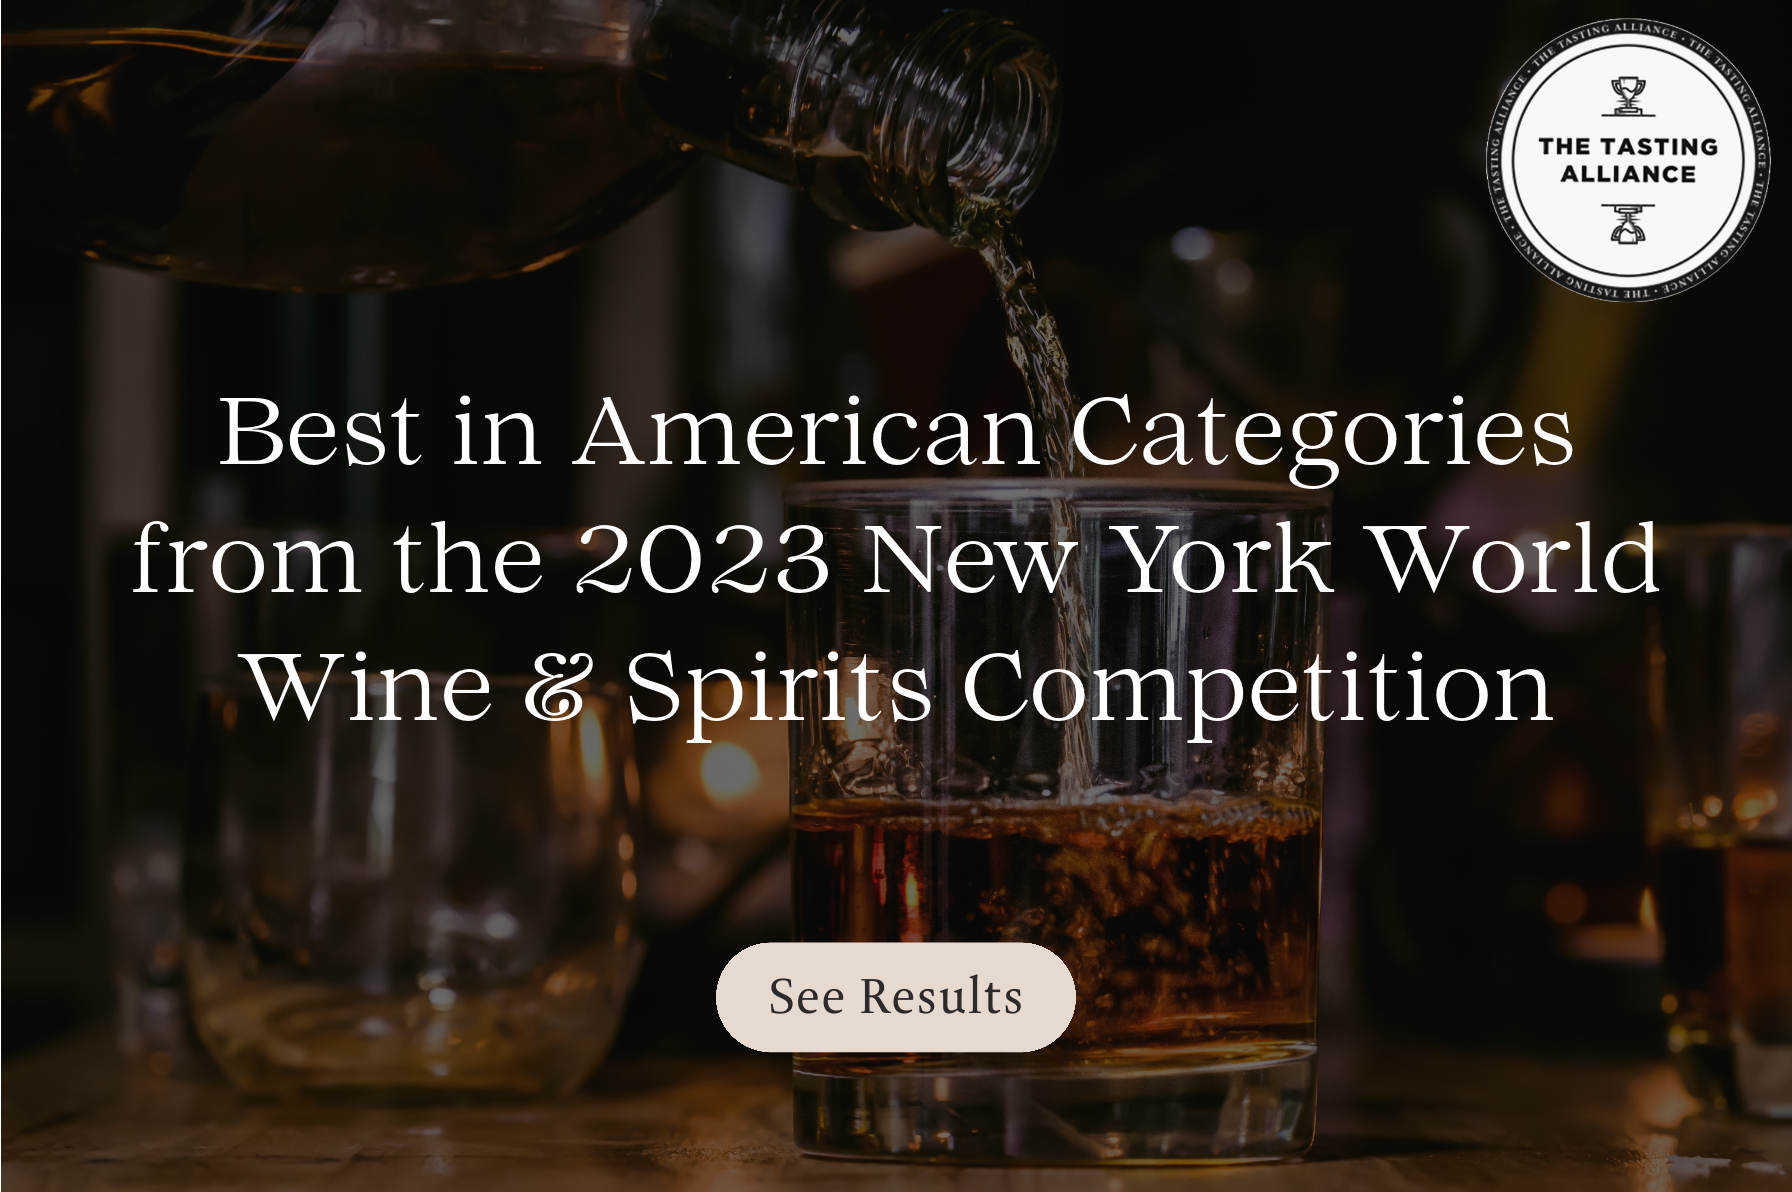 The Tasting Alliance's Best in American Categories Finalists and Winners